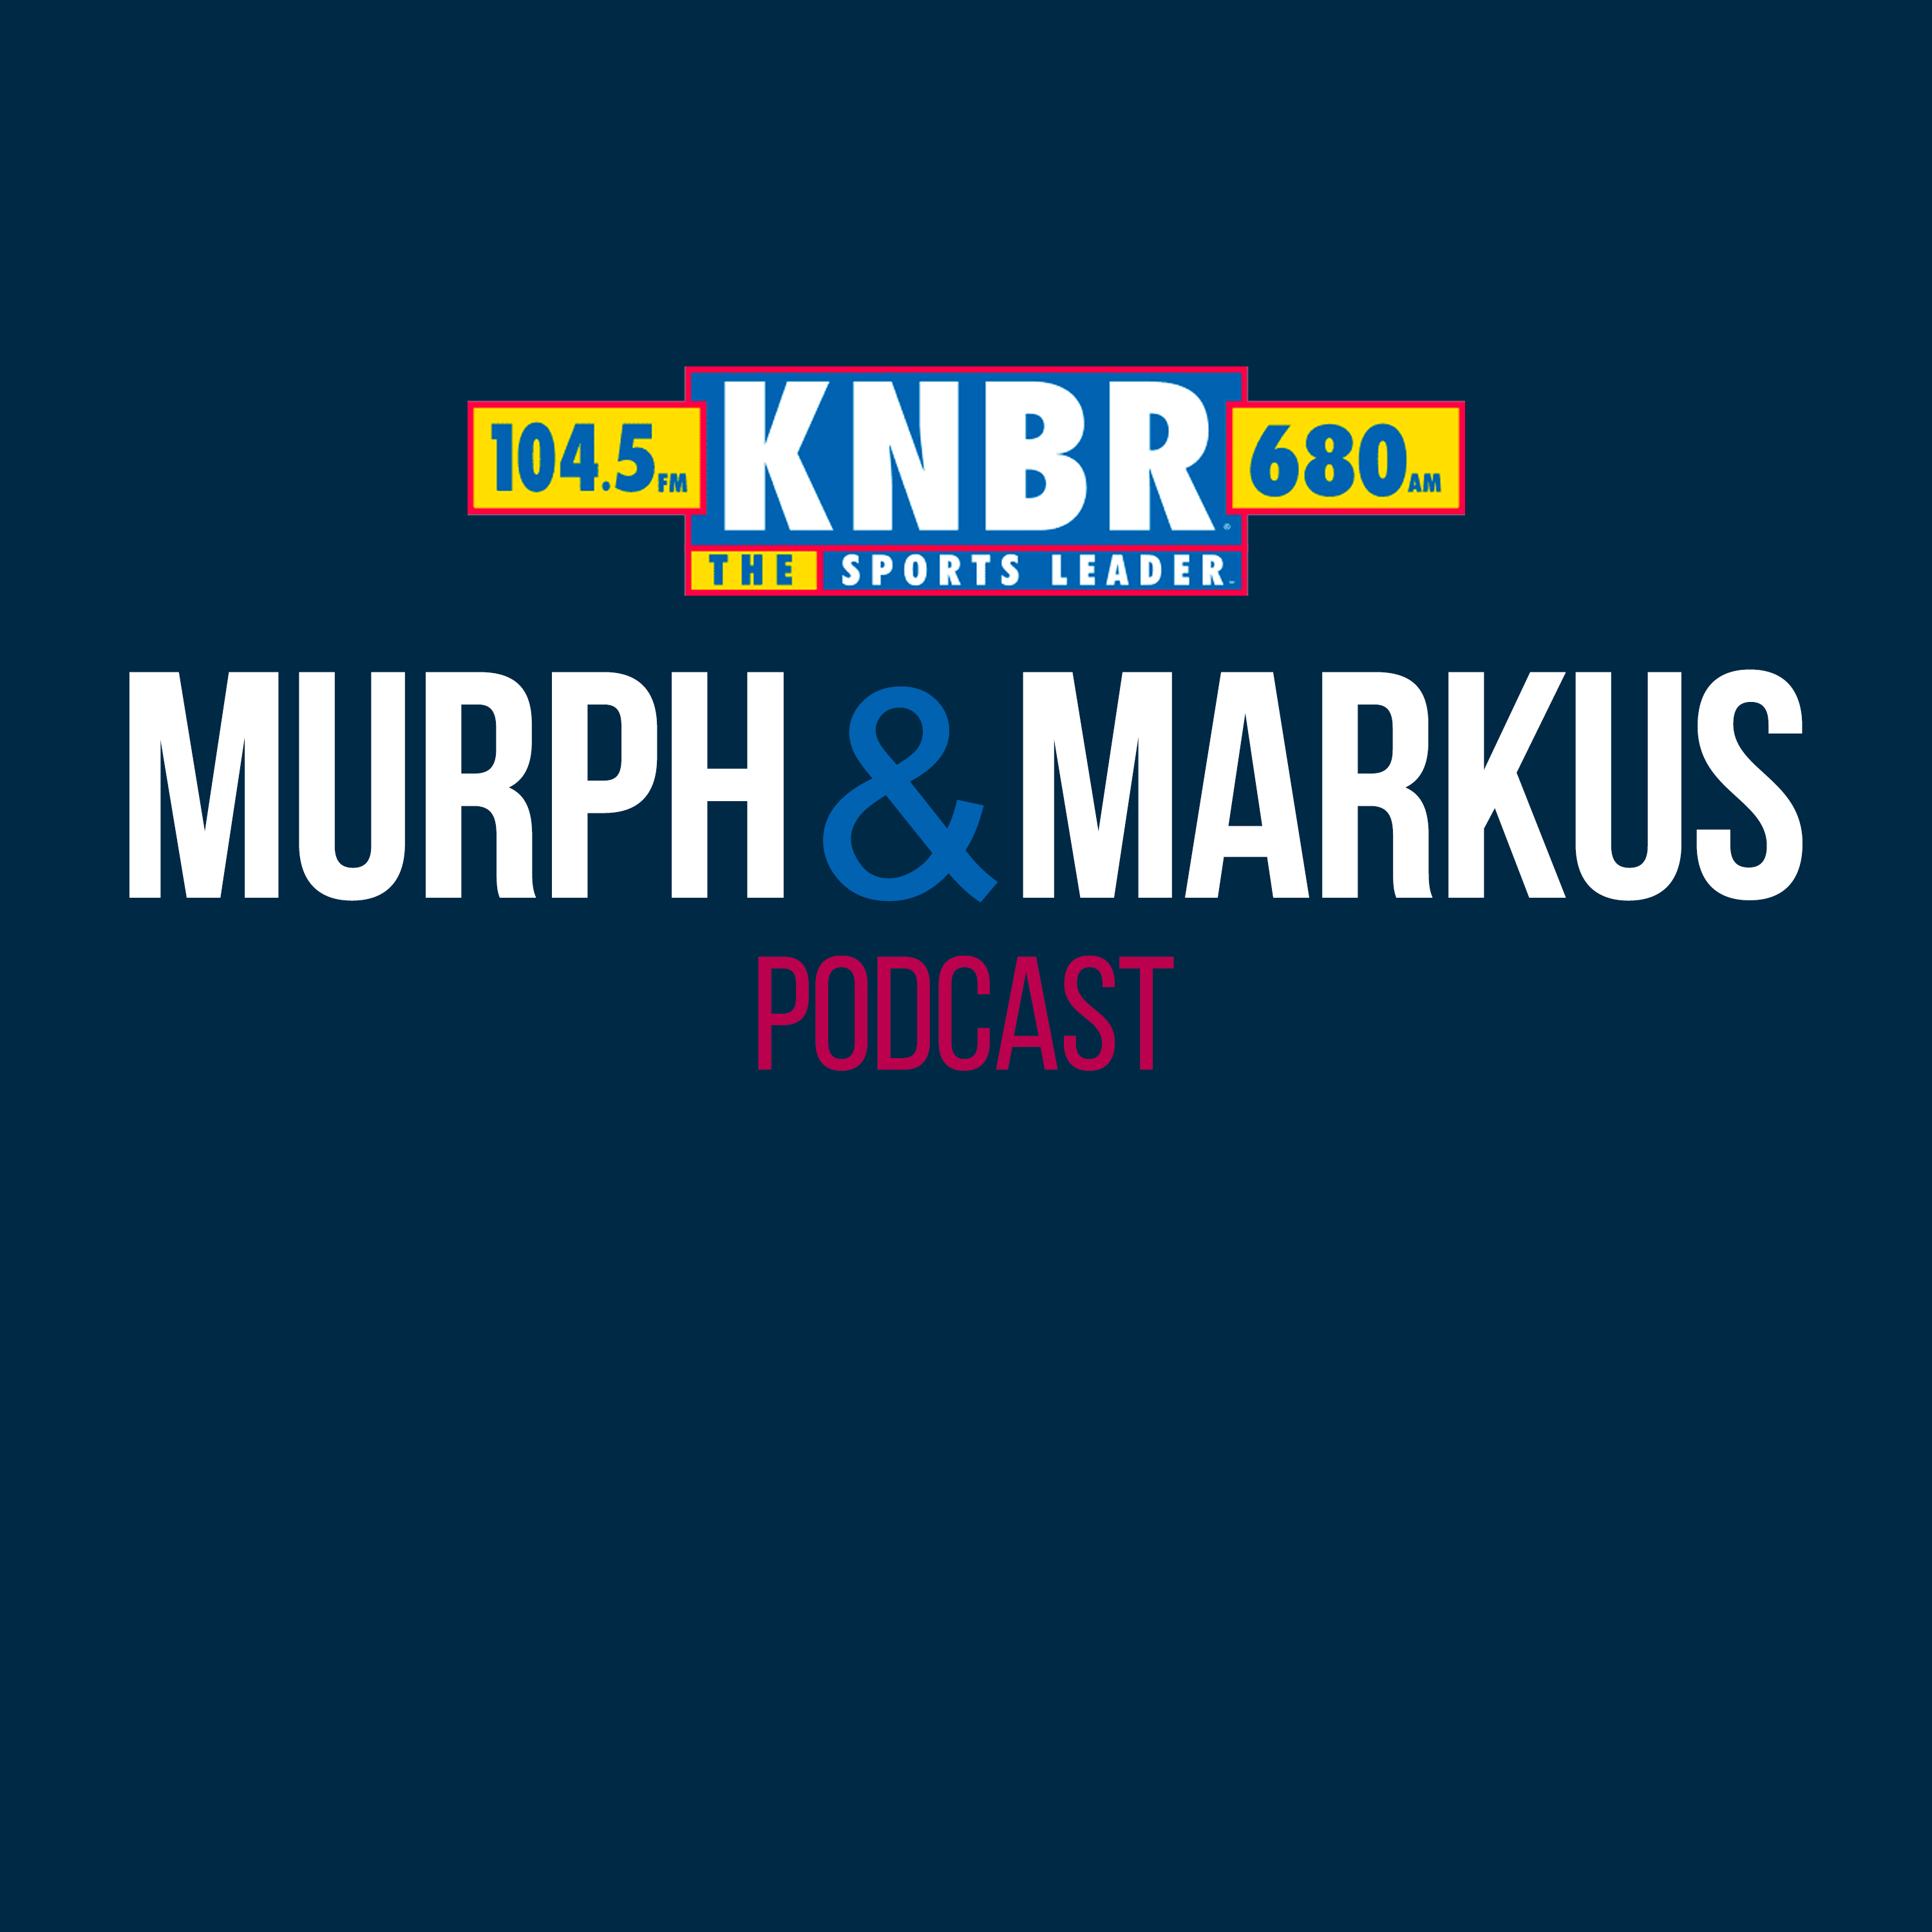 5-16 Hour 4: Murph & Markus give their perspective on the Giants big win last night vs the Dodgers, hear some of Curt Casali's postgame comments on his crazy 24 hours, and close the show